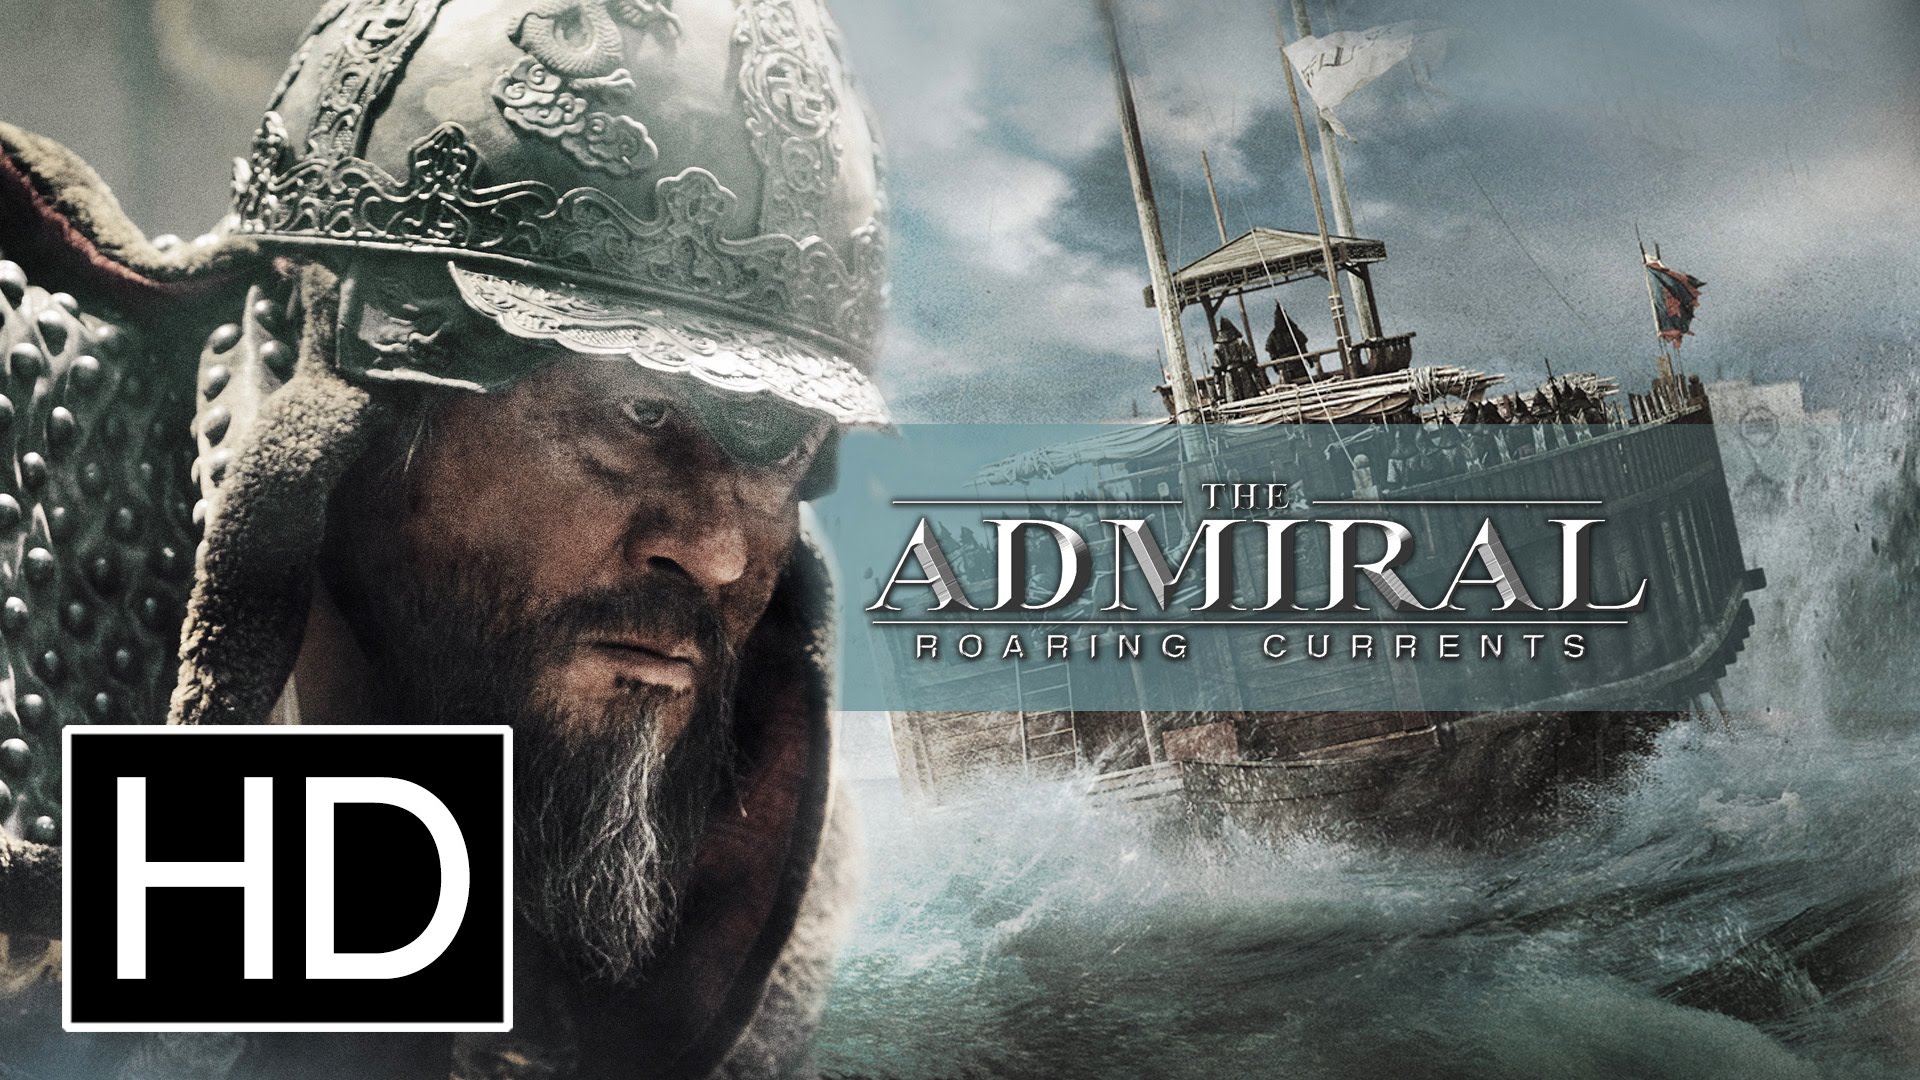 The Admiral: Roaring Currents Pics, Movie Collection